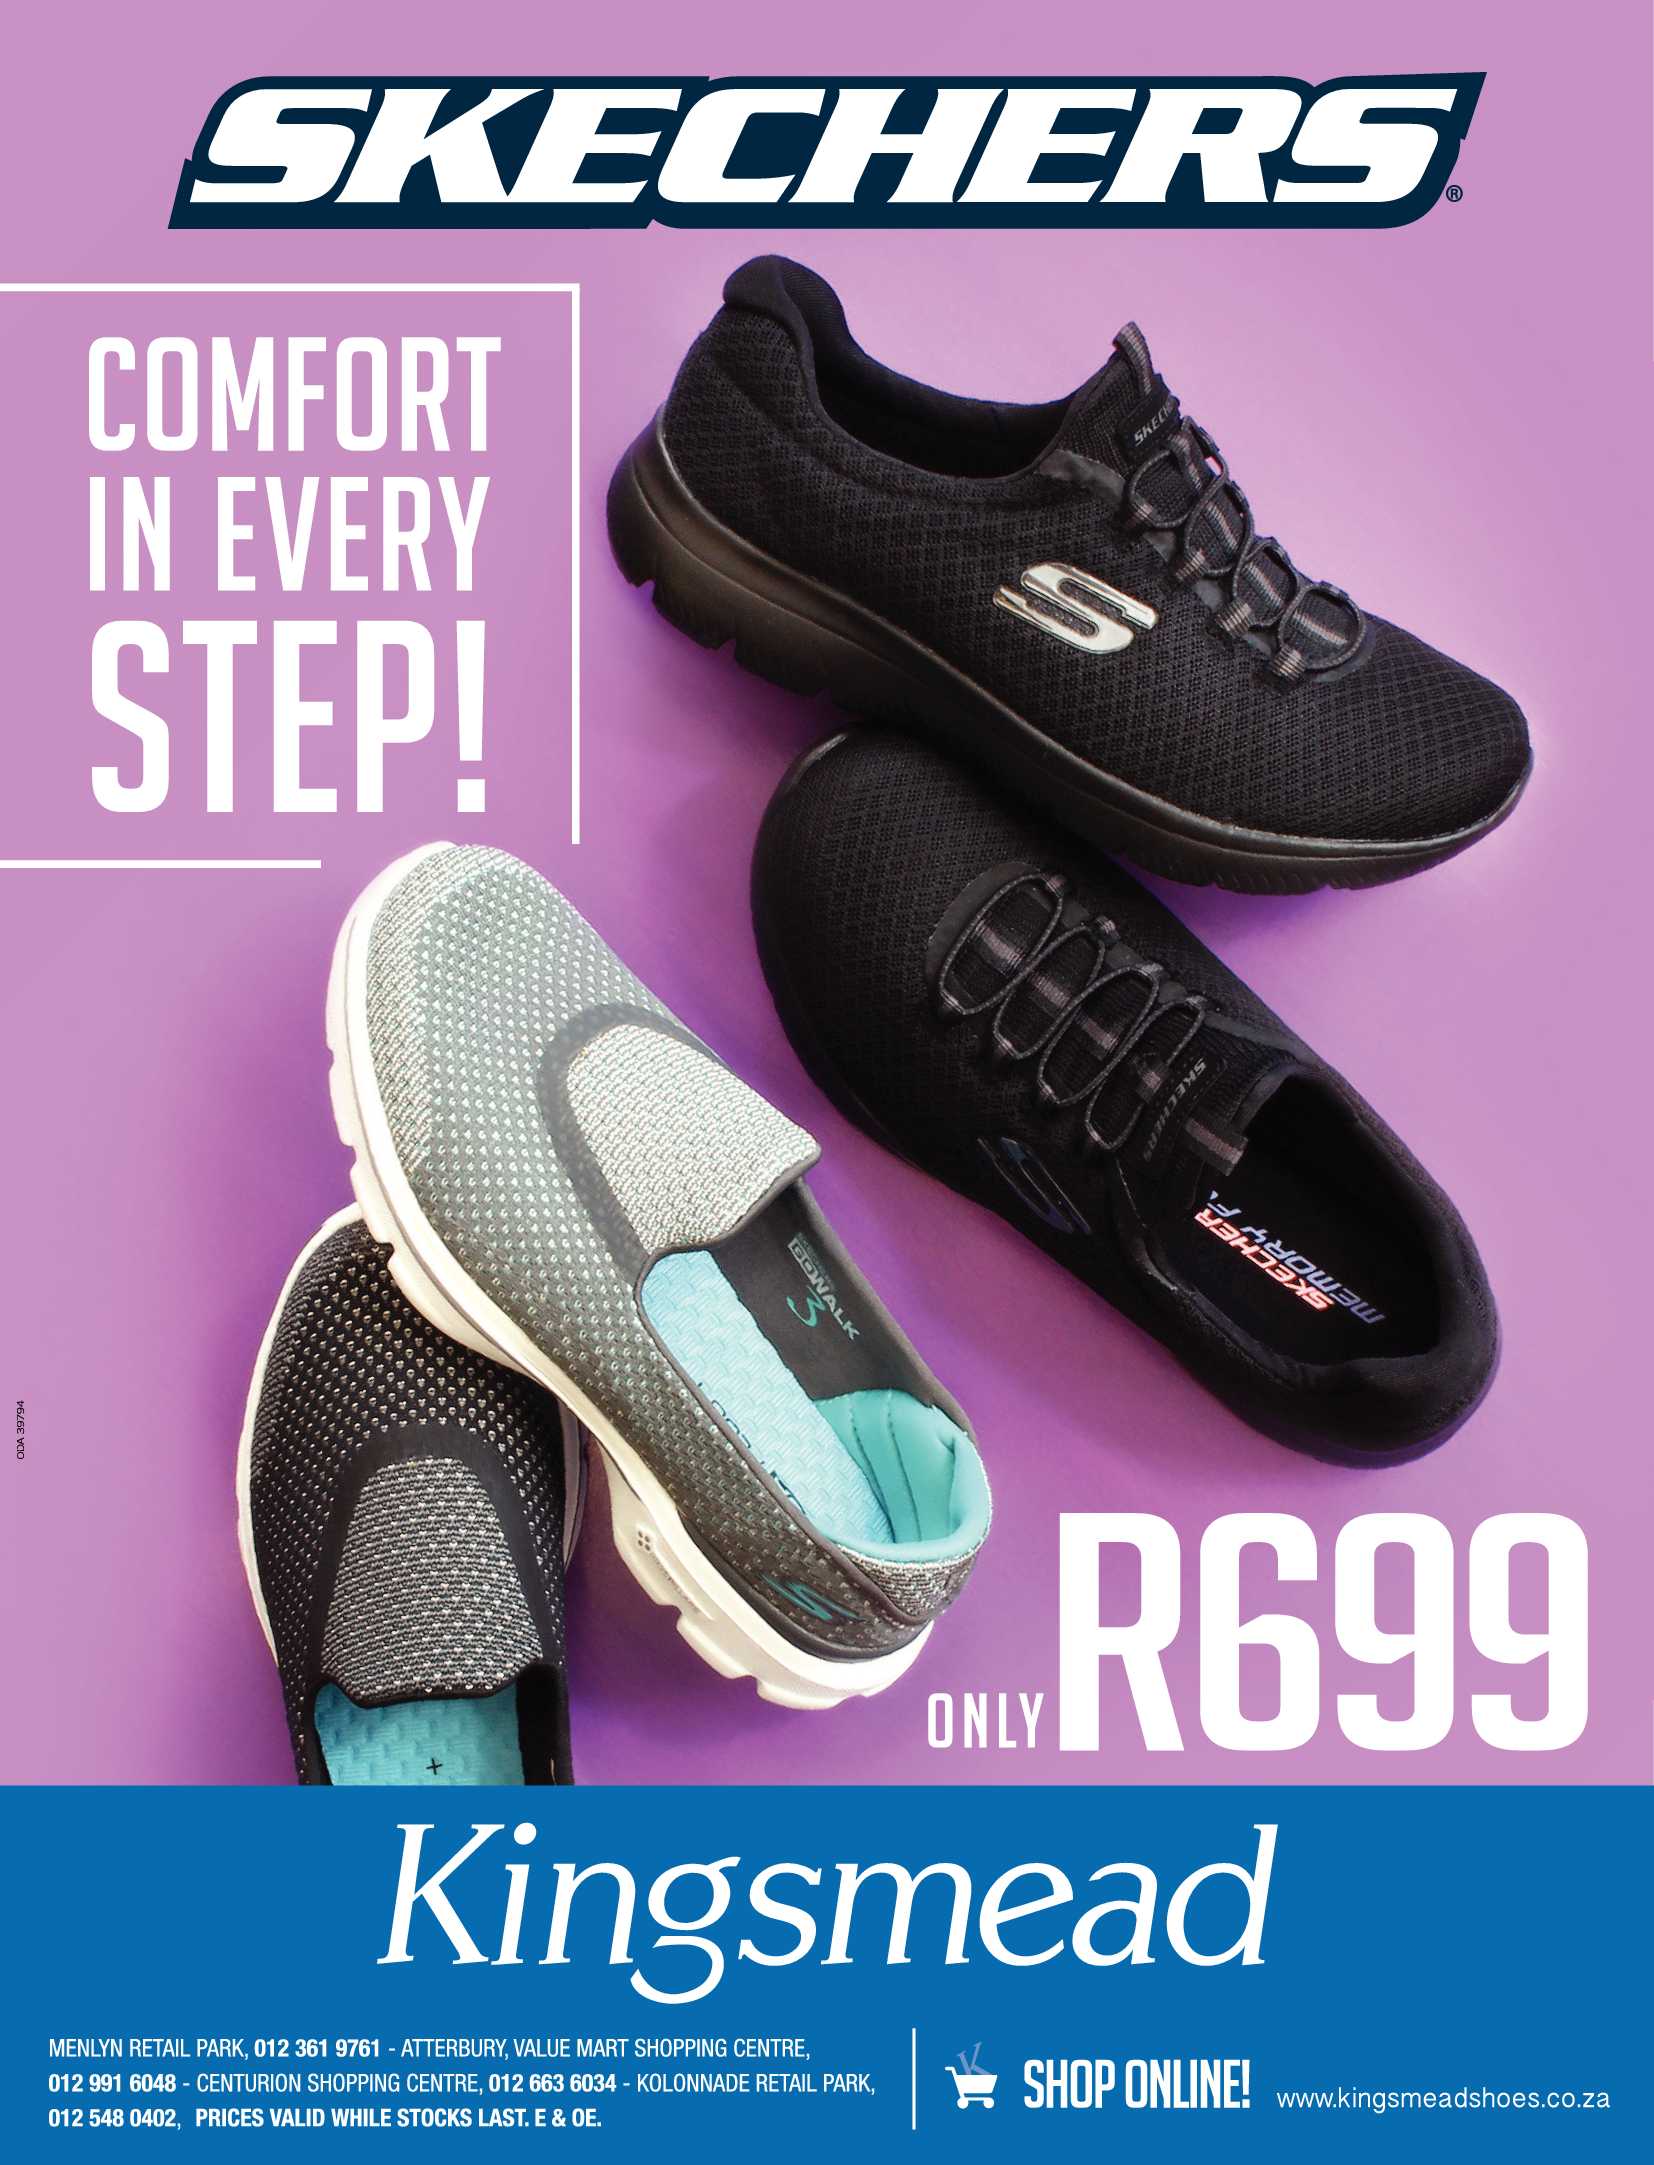 buy skechers shoes online south africa